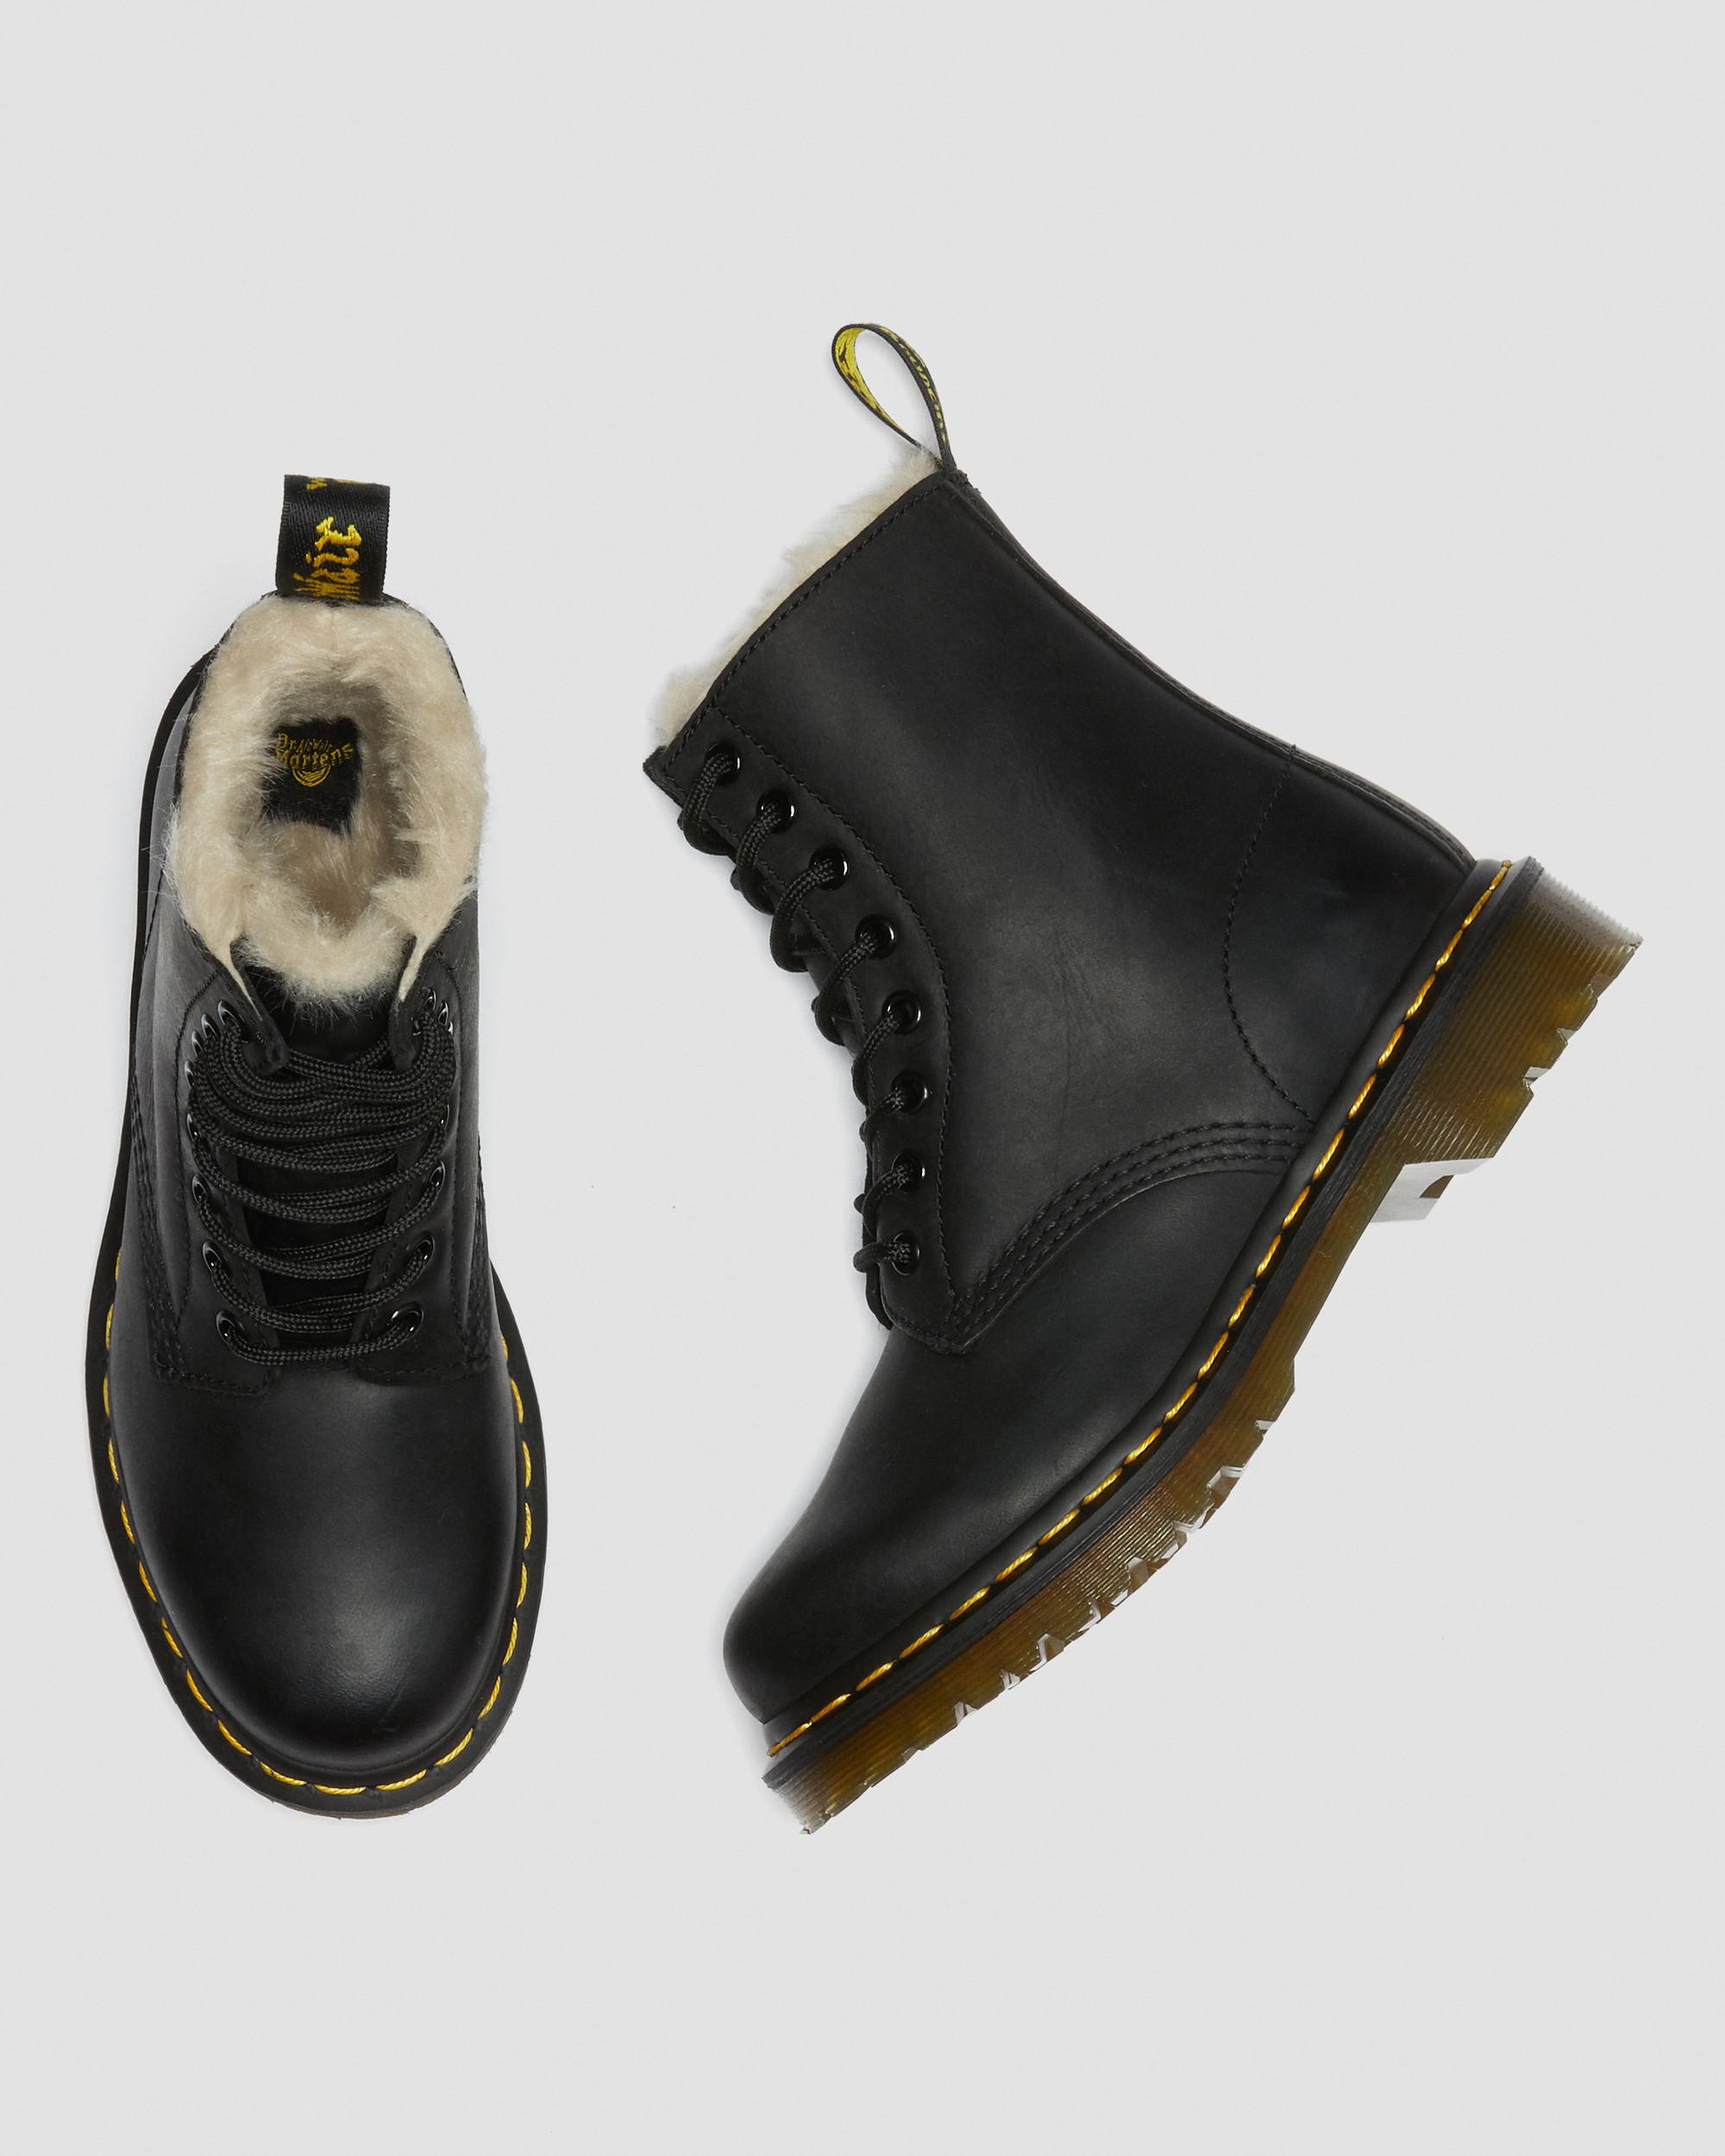 DR MARTENS 1460 Serena Faux Fur Lined Leather Lace Up Boots